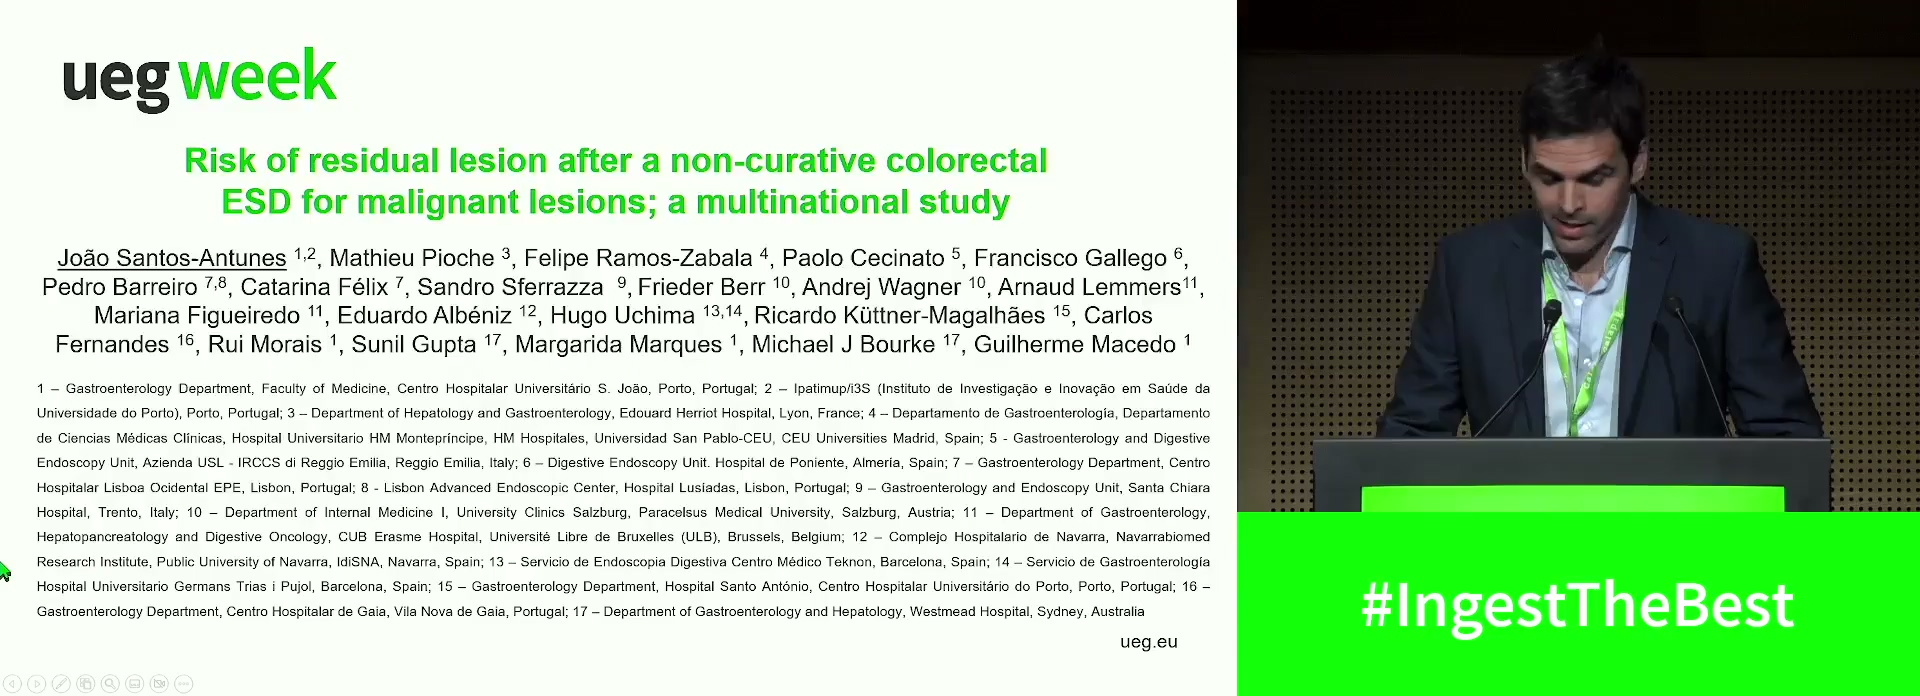 RISK OF RESIDUAL NEOPLASIA AFTER A NON-CURATIVE COLORECTAL ESD FOR MALIGNANT LESIONS; A MULTINATIONAL STUDY